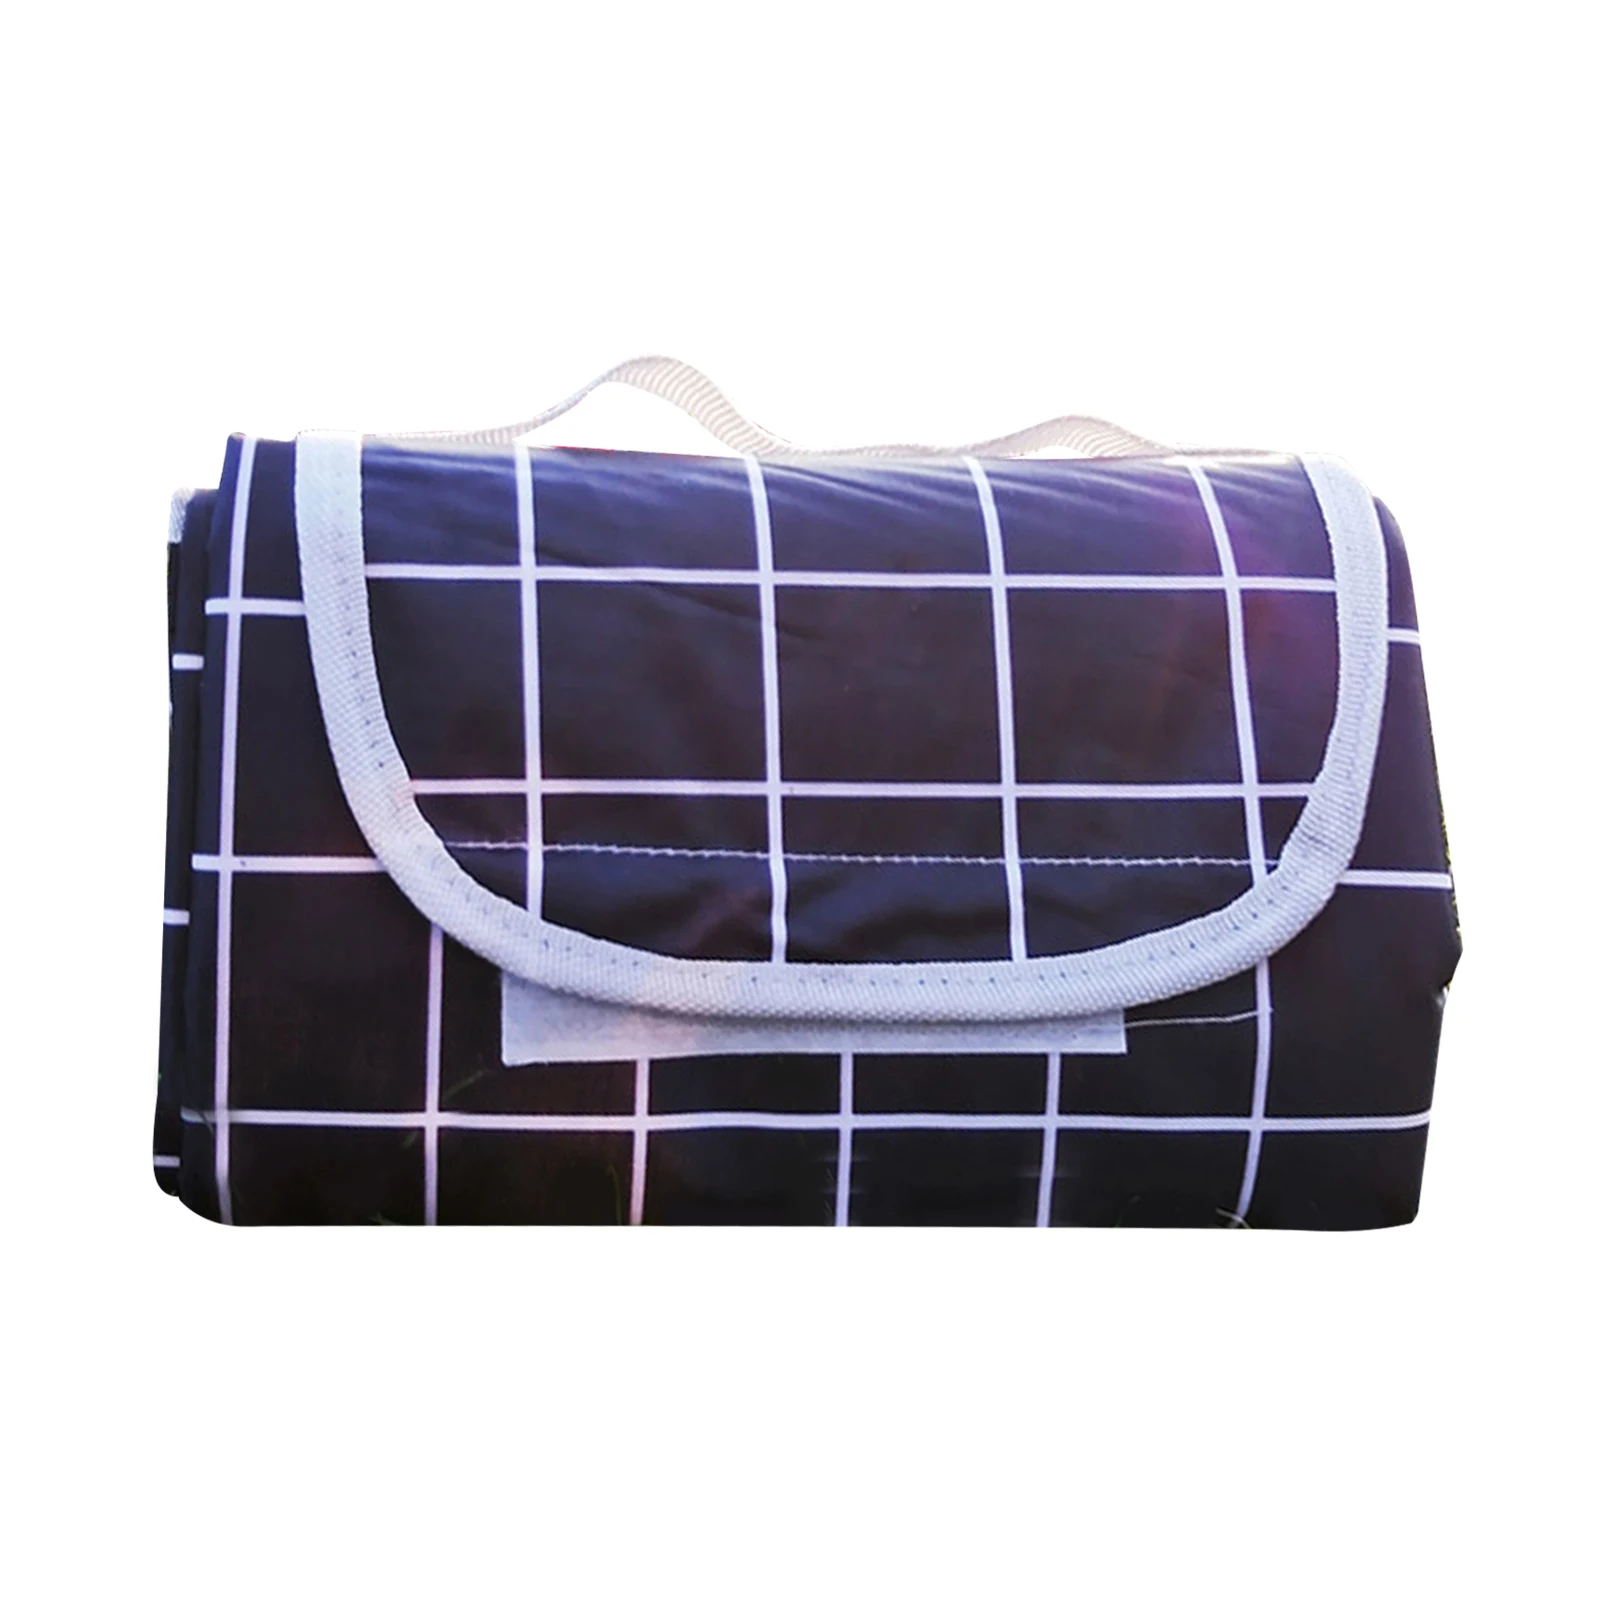 Foldable Picnic Blanket 200x200CM Outdoor Waterproof Picnic Mat Fashion Pad Breathable Water Resistant Picnic Blanket Mat